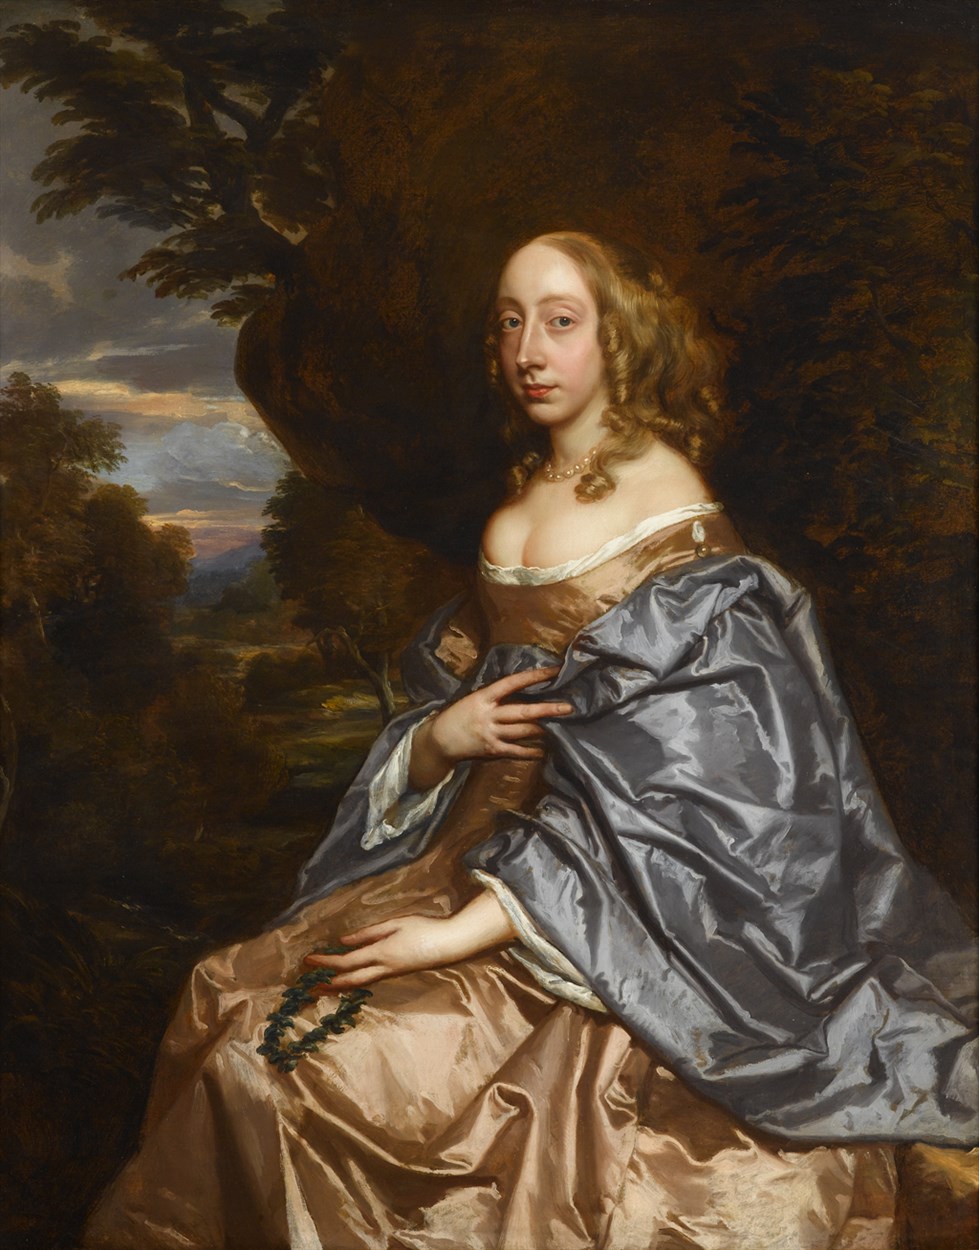 Lot 111 - Attributed to Sir Peter Lely  (British, 1618-1680)